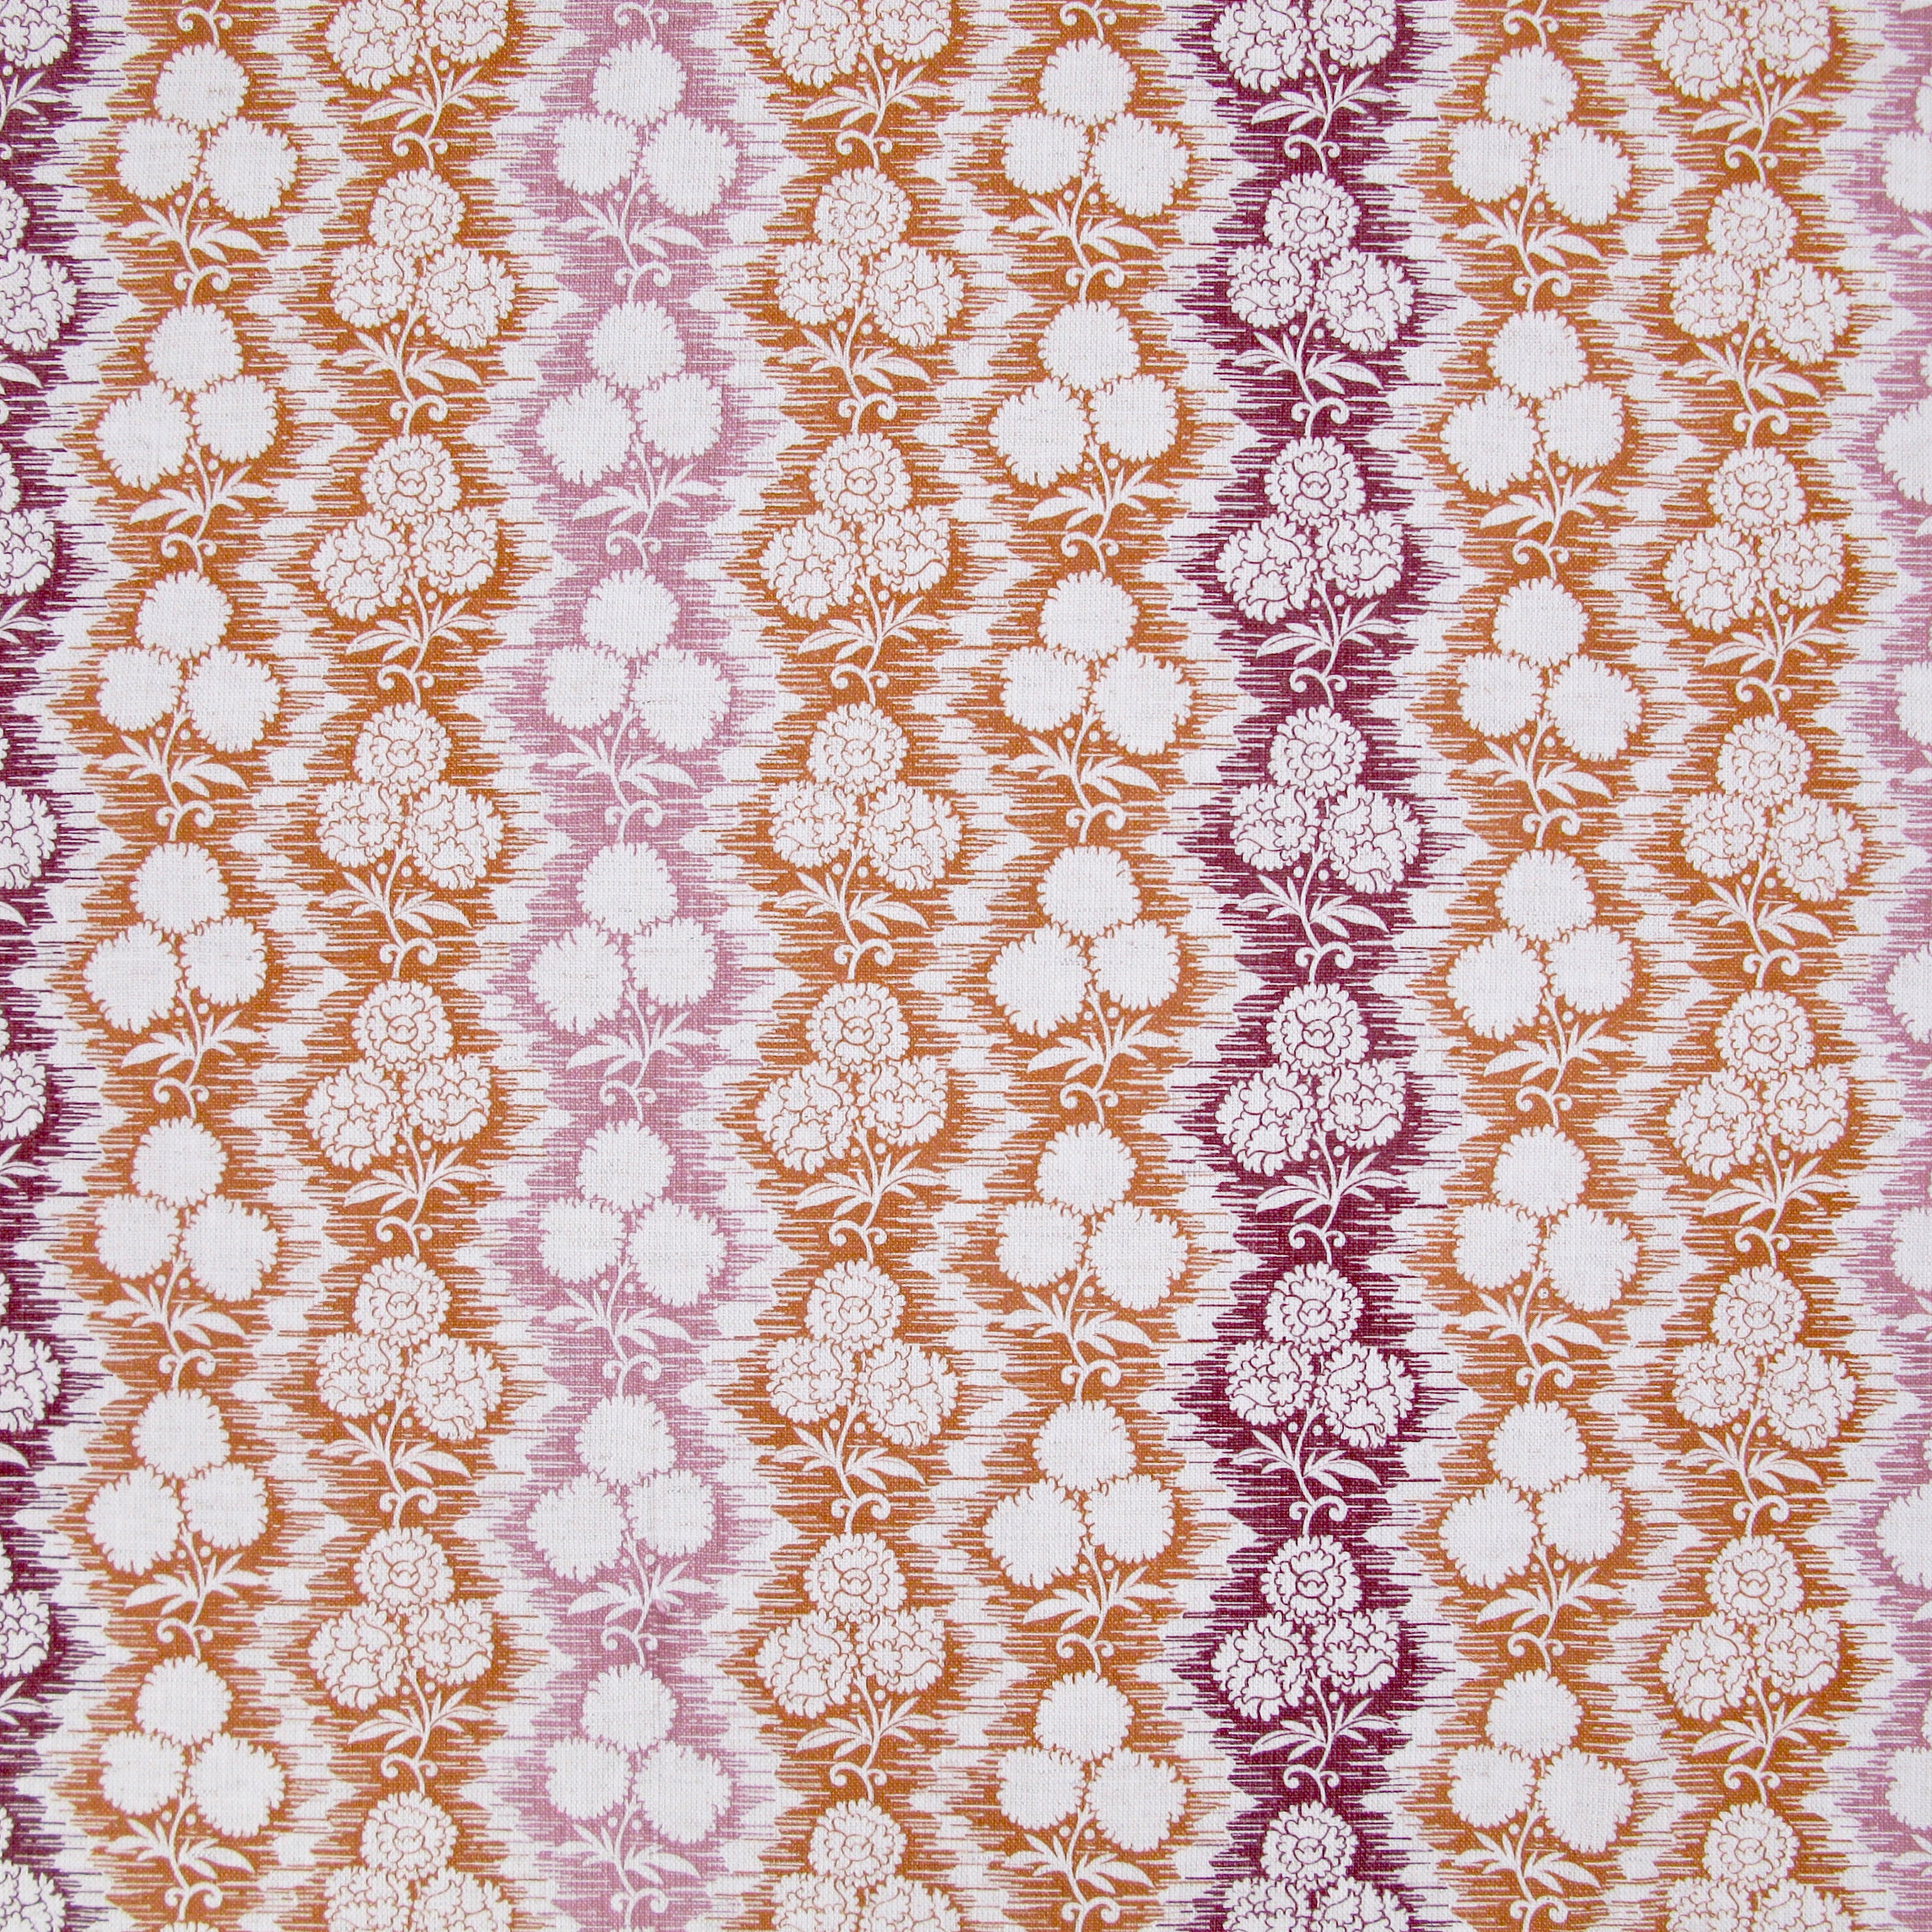 Fabric in a detailed botanical stripe print in shades of pink, purple and orange on a white field.